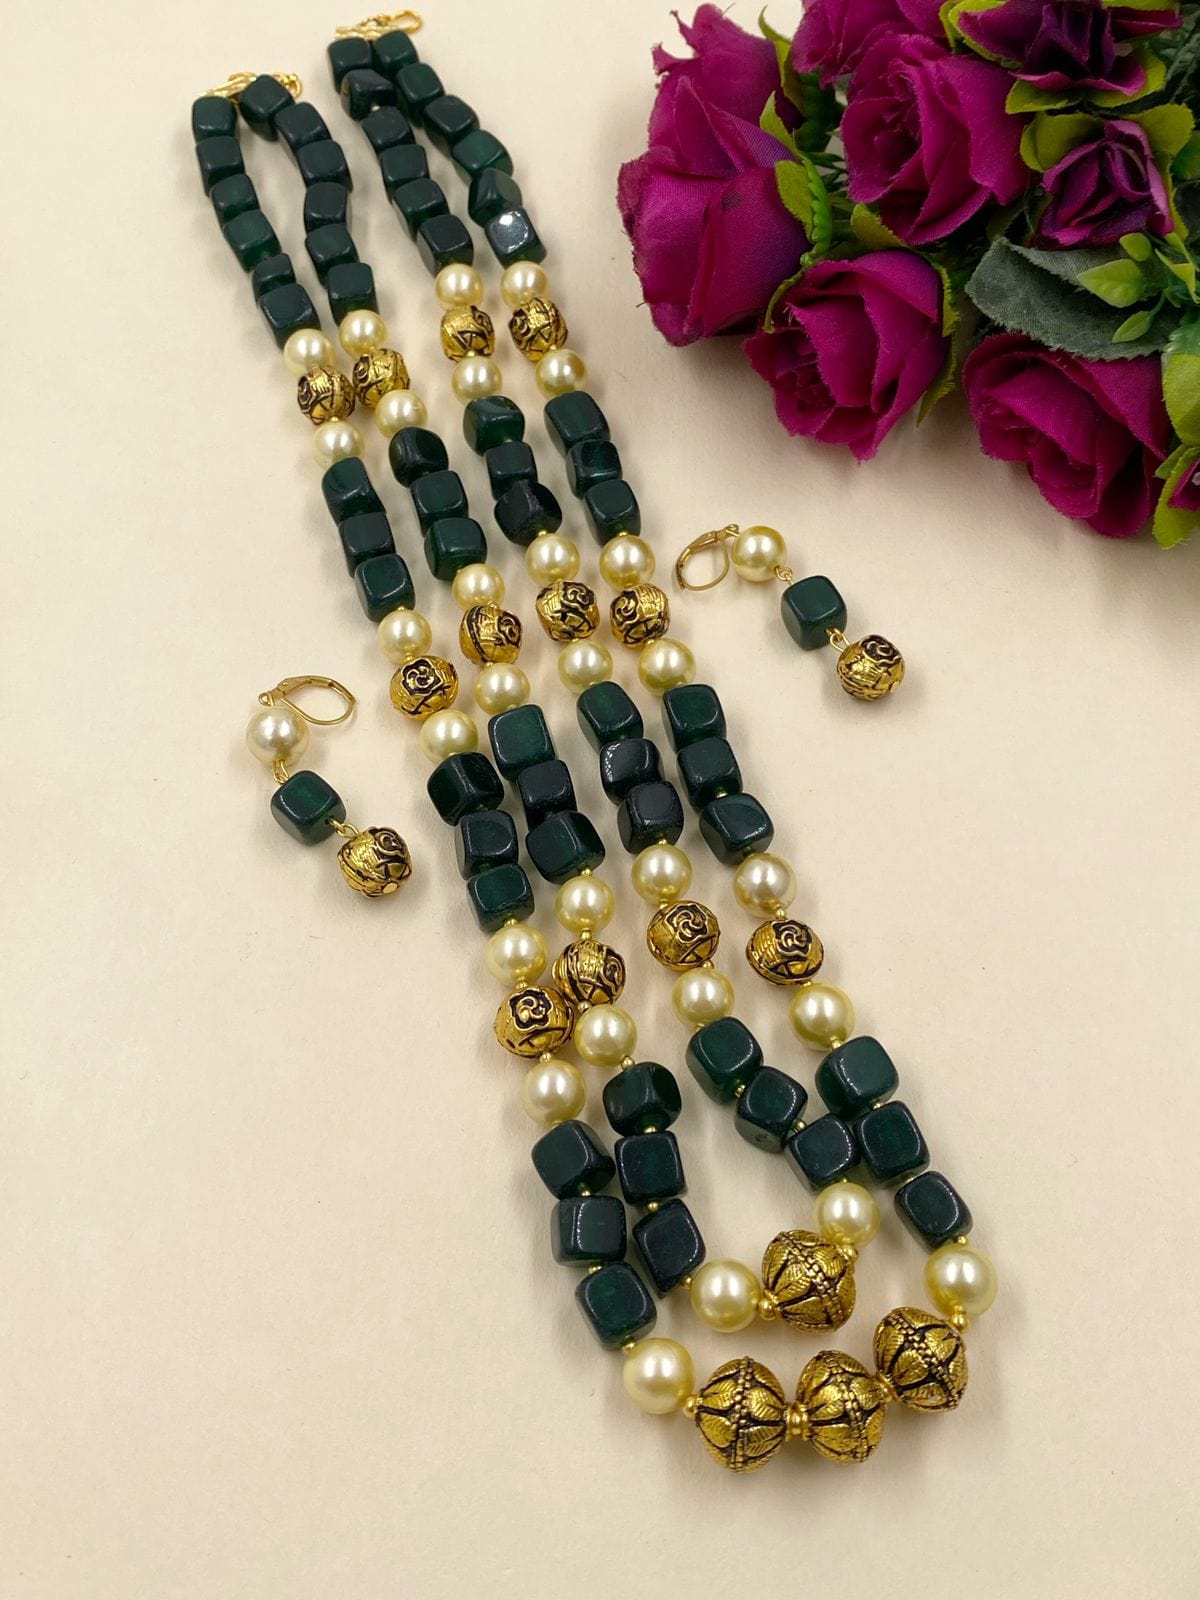 Semi Precious Gemstone Layered Green Jade And Antique Beads Necklace By Gehna Shop Beads Jewellery